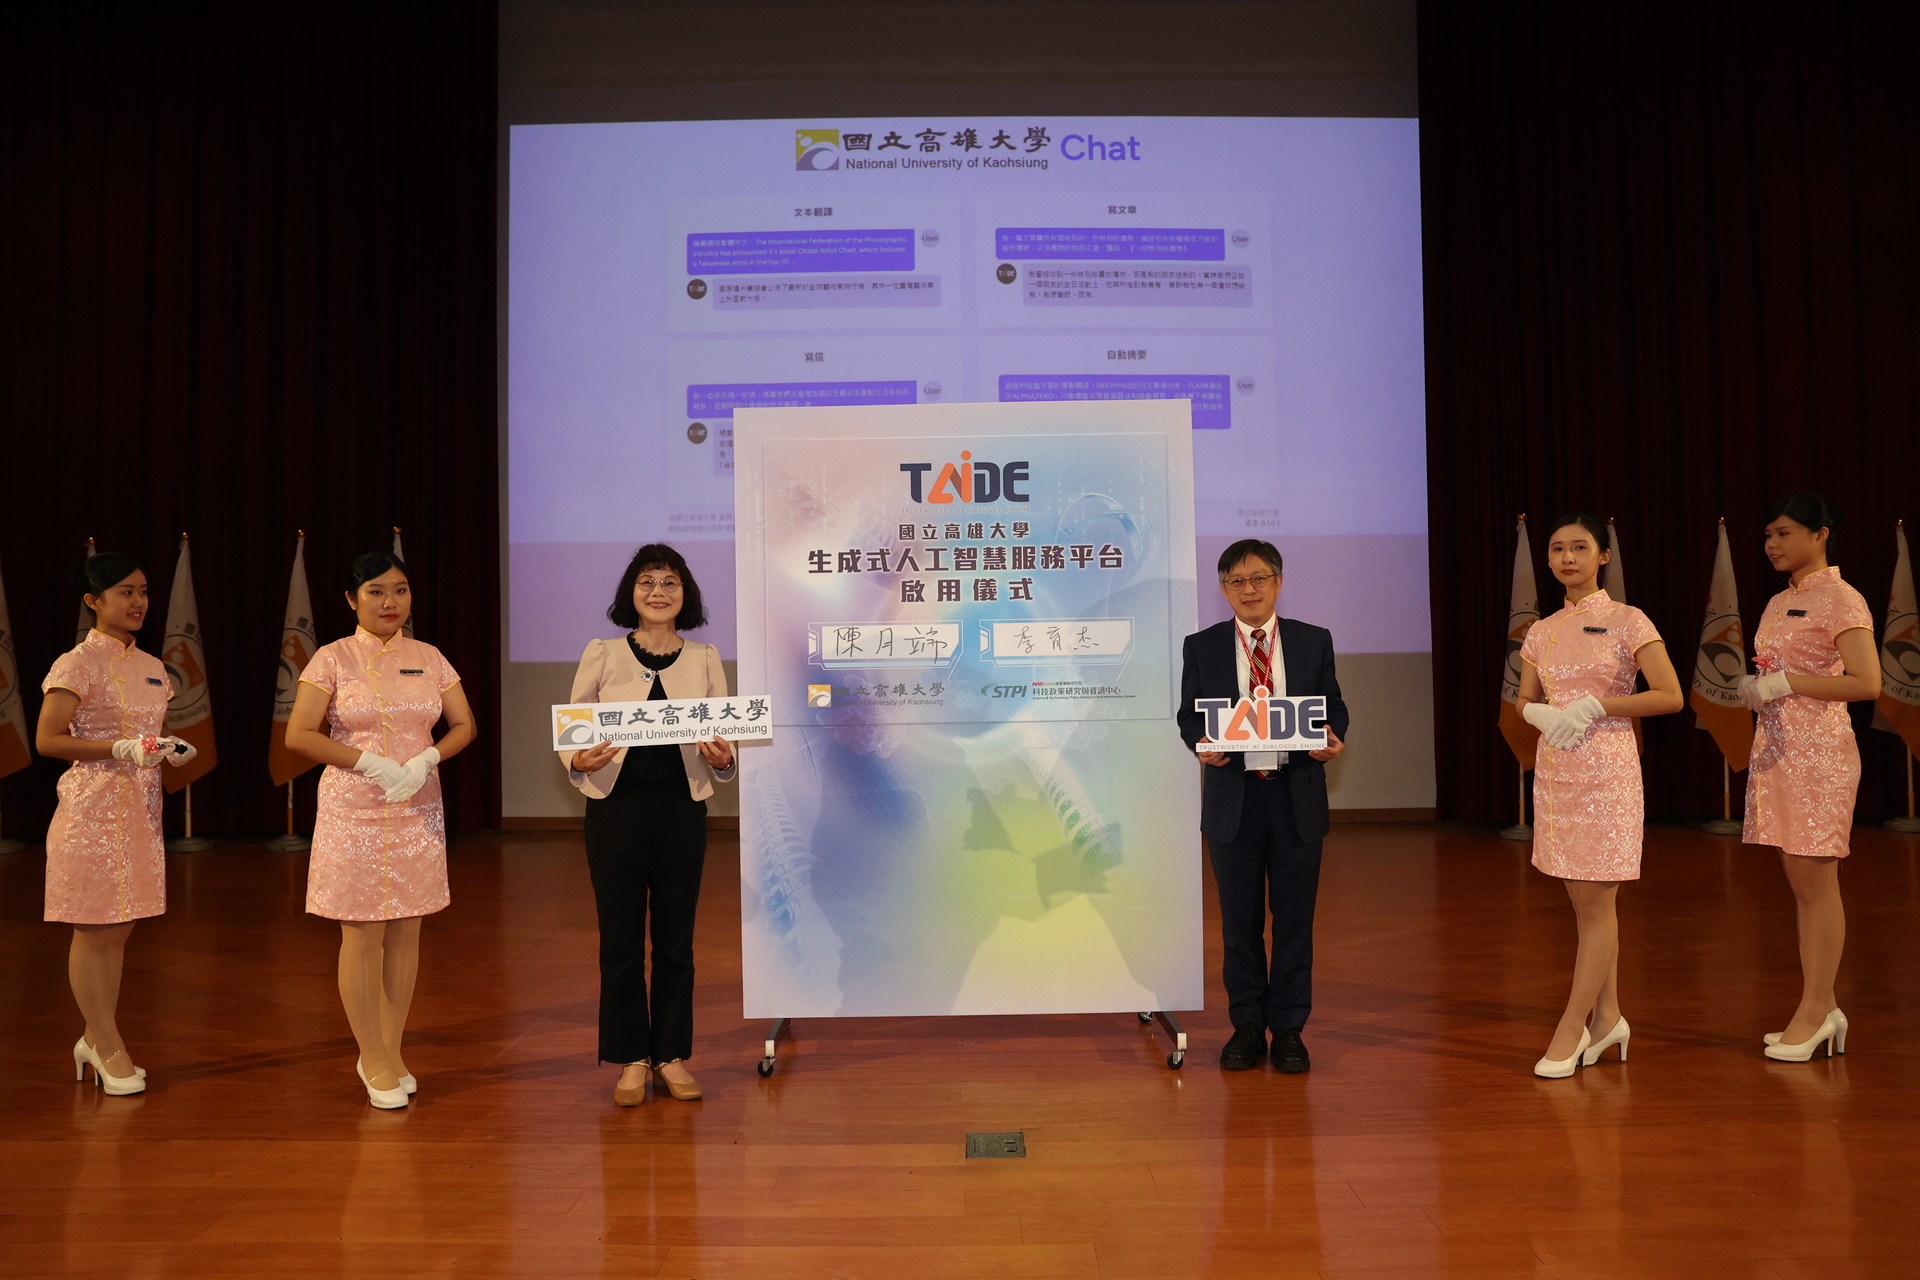 President Chen Yueh-Tuan of NUK and Lee Yuh-Jye, the principal investigator of the TAIDE project signed an MOU on behalf of both parties. 01